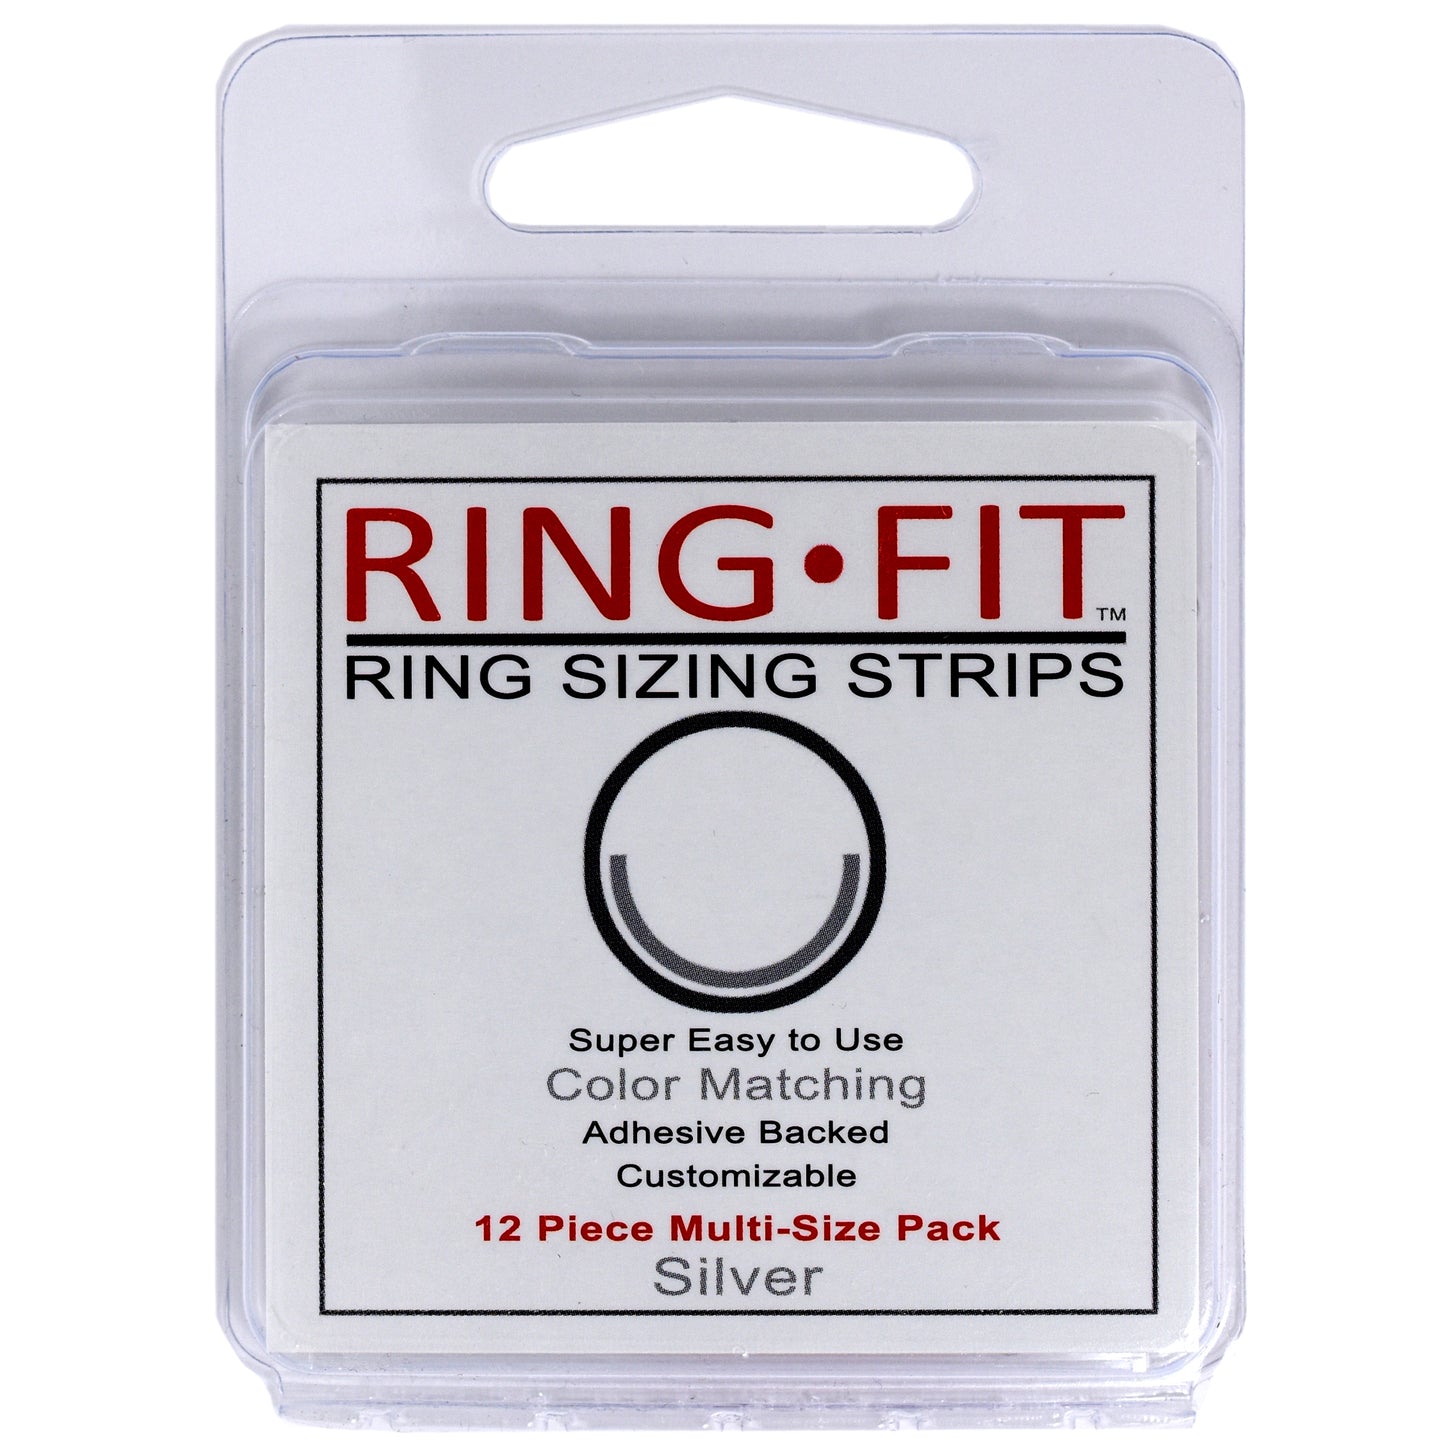 Ring-Fit Ring Sizing Strips for WIDE Rings (wider than 3mm)